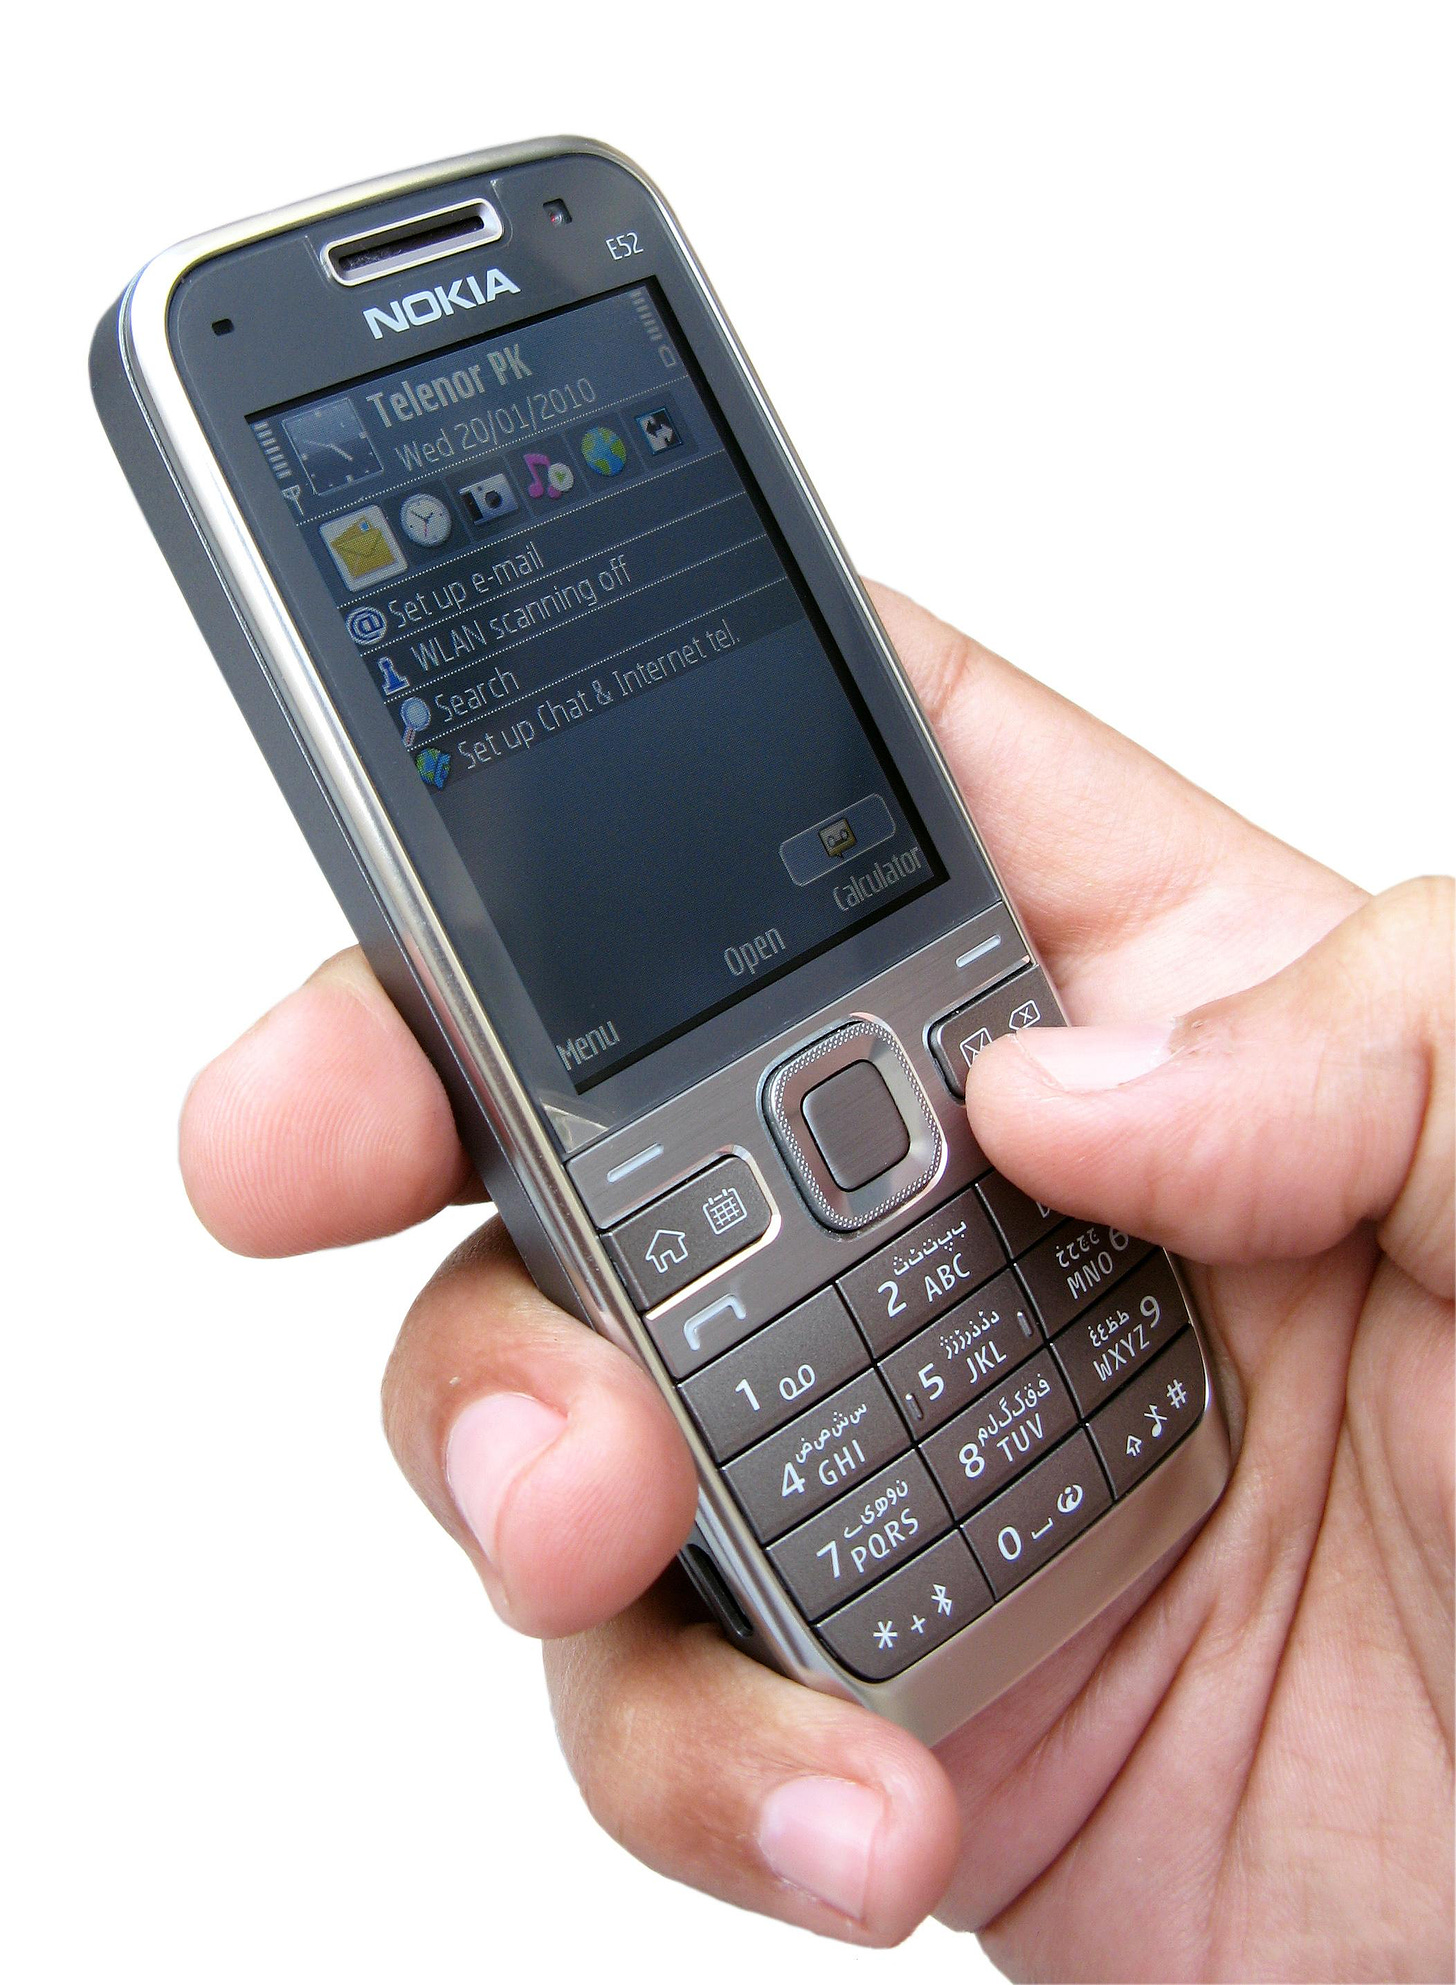 Nokia E52 phone with a physical keyboard in a person's hand, phone screen showing the desktop with email icon in focus